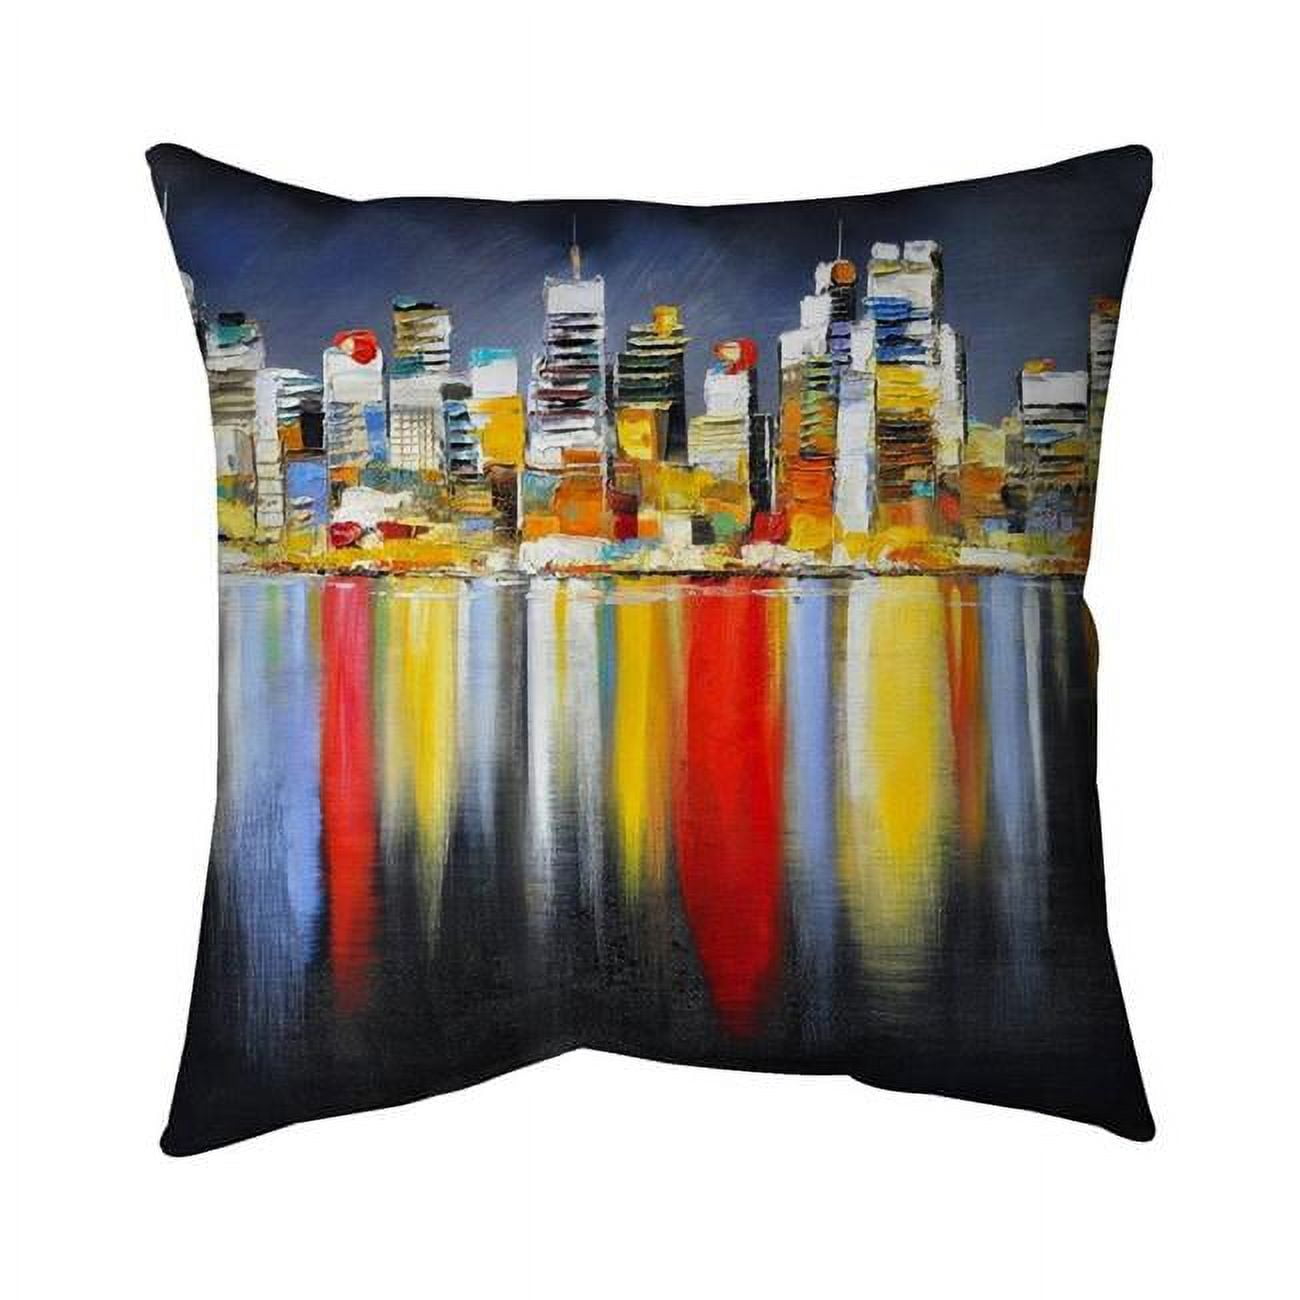 Begin Home Decor 5542-2020-CI56 20 x 20 in. Colorful Reflection of A Cityscape by Night-Double Sided Print Outdoor Pillow Cover